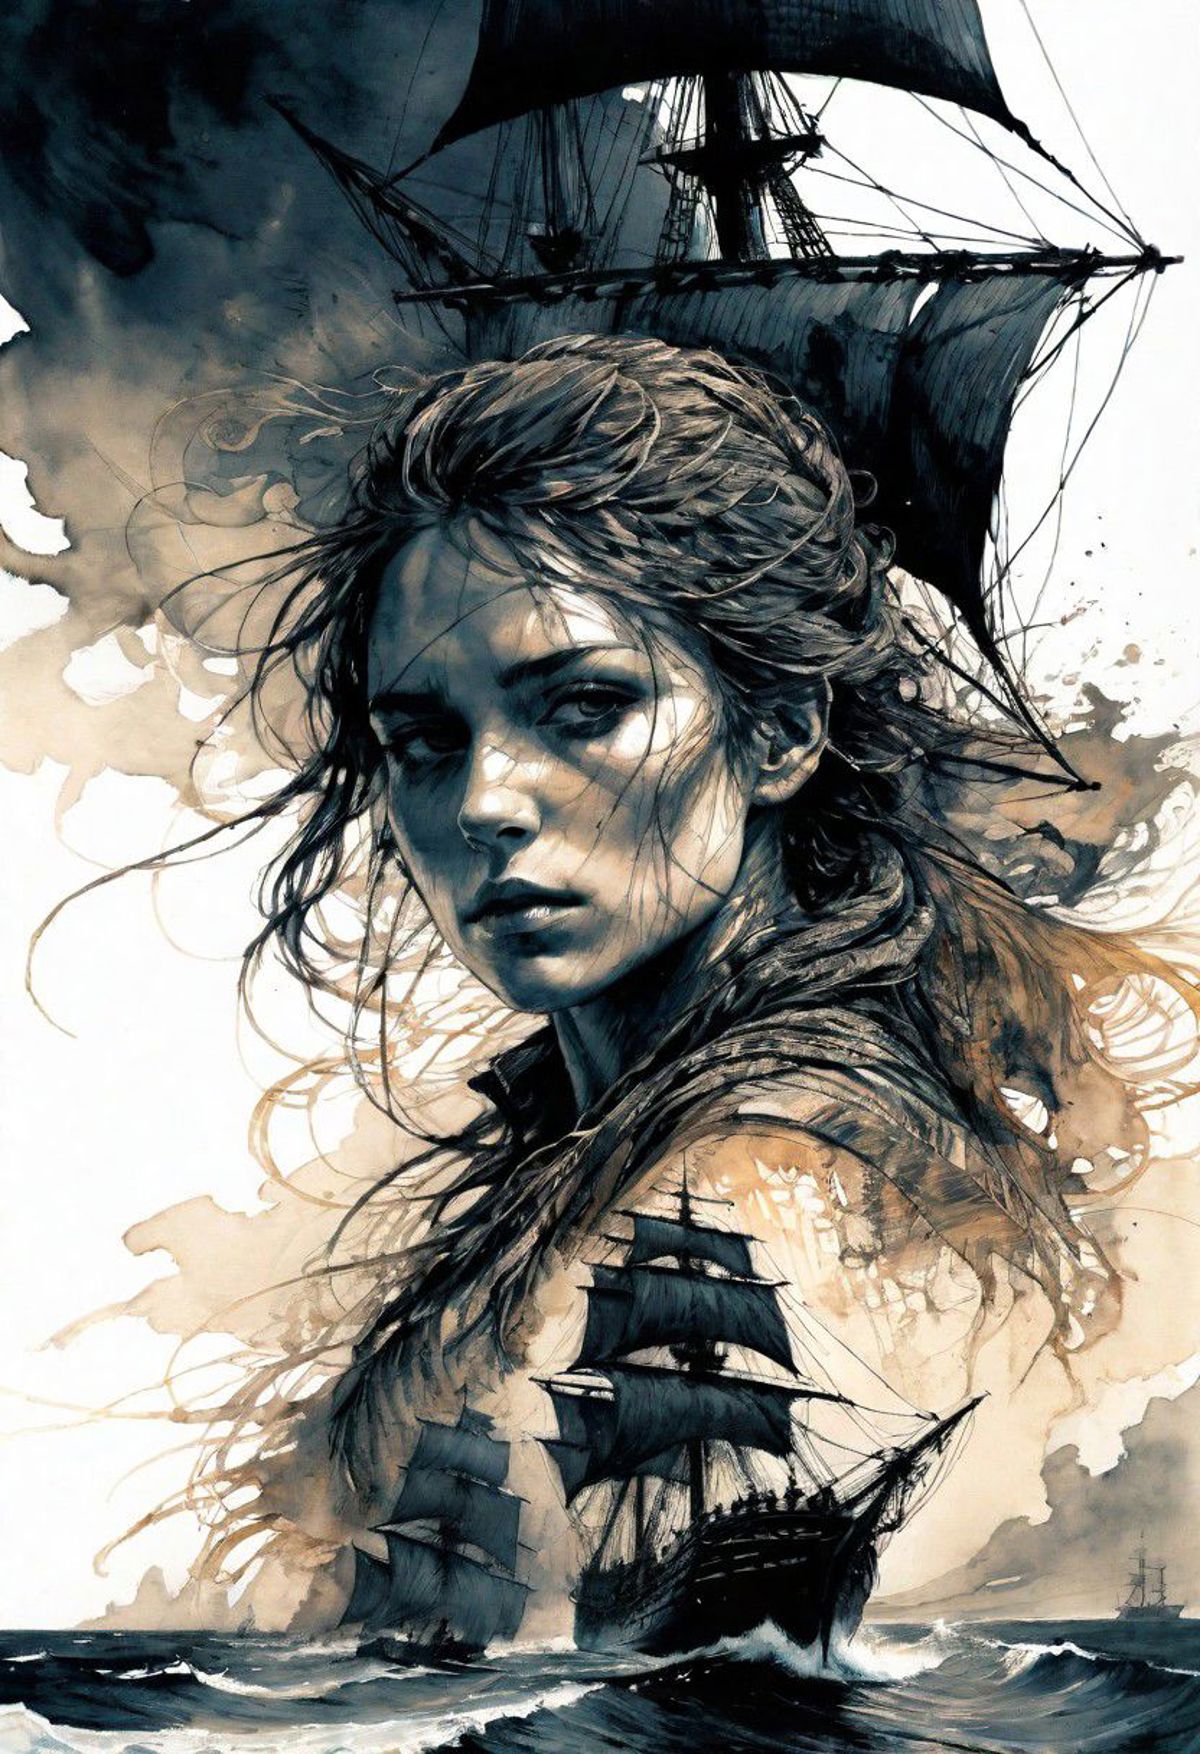 A beautiful woman with a ponytail is depicted in a painting with a ship in the background.